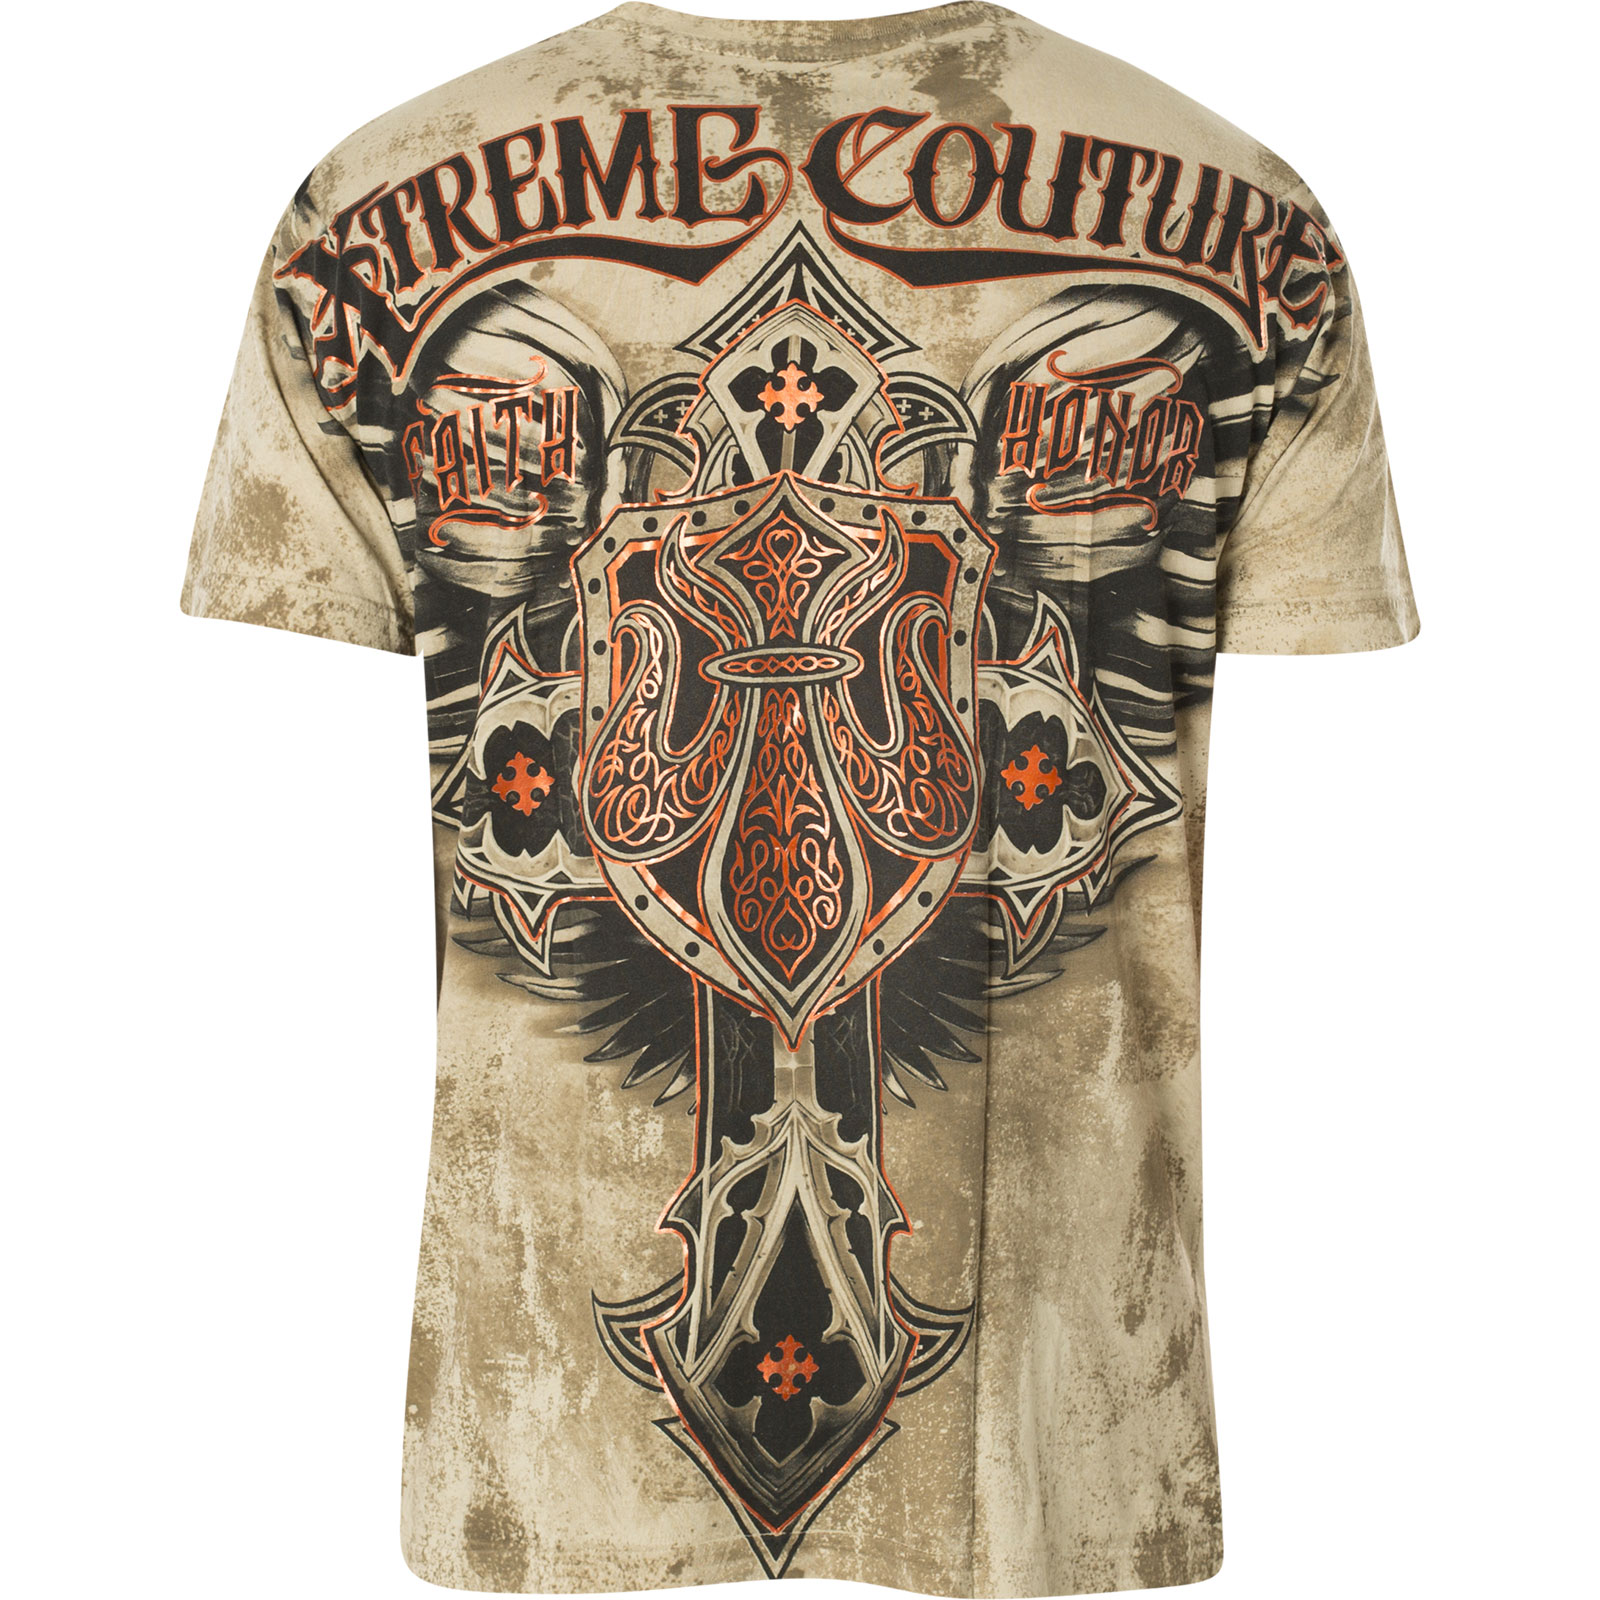 Xtreme Couture T- Shirt Lockdown with a large cross